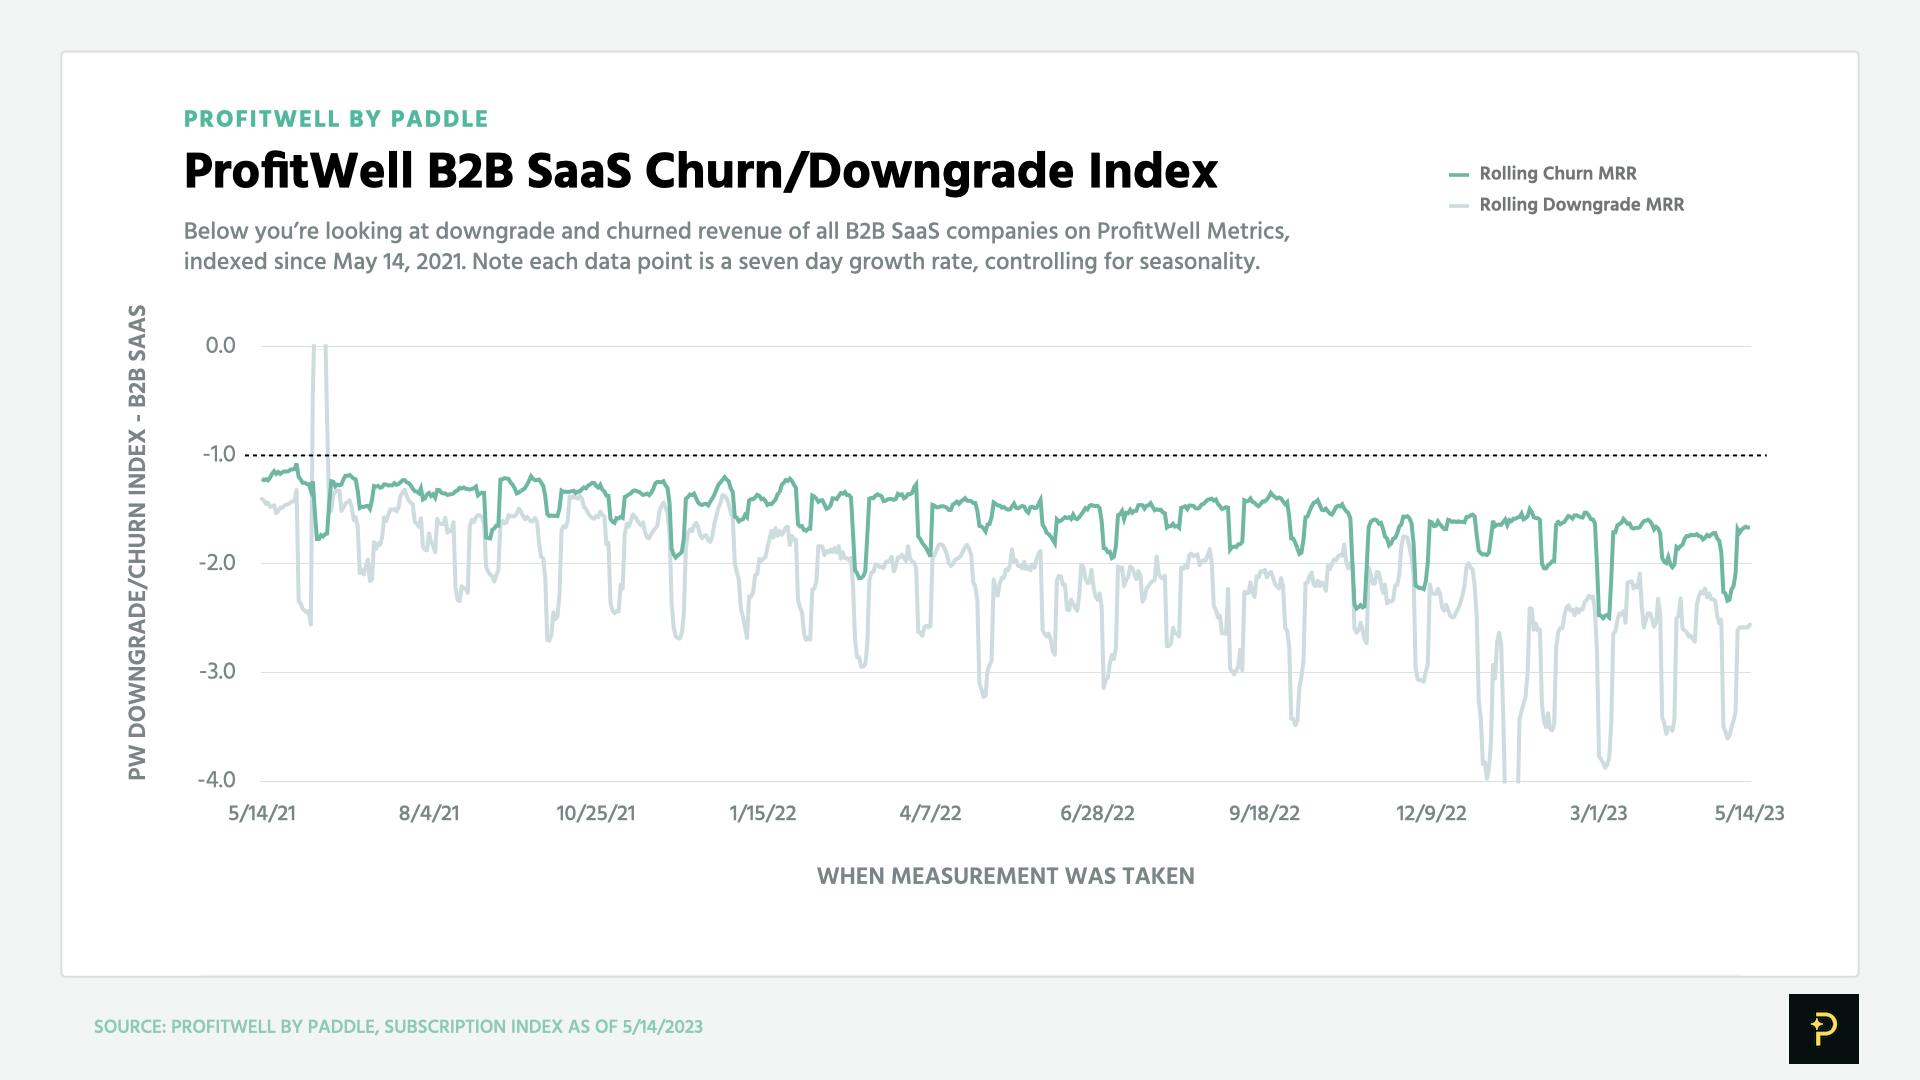 May 2023 chart of the ProfitWell B2B SaaS Churn/Downgrade Index, showing readings dropping further from the baseline, to between -1.8 and -2.2.